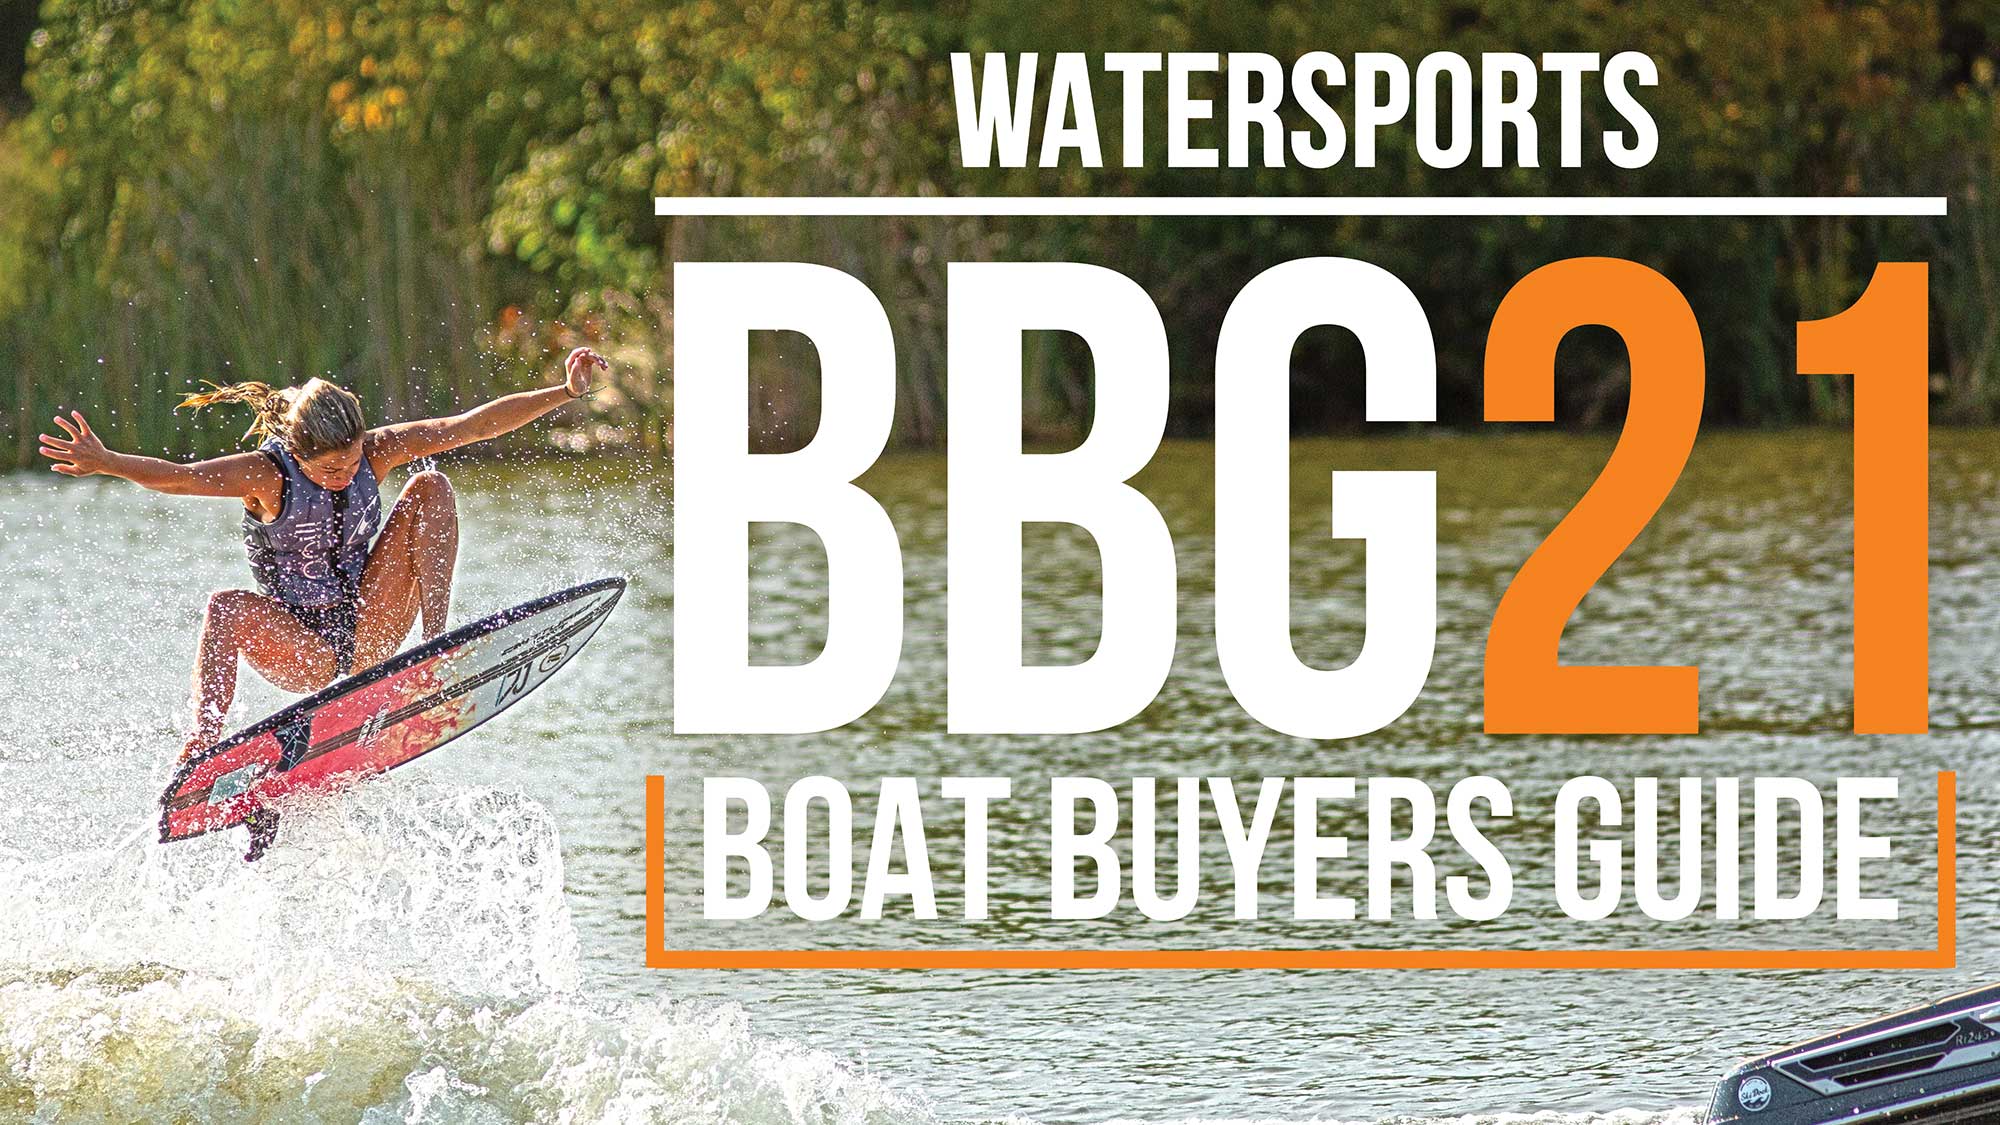 Watersports BBG21 Boat Buyer's Guide